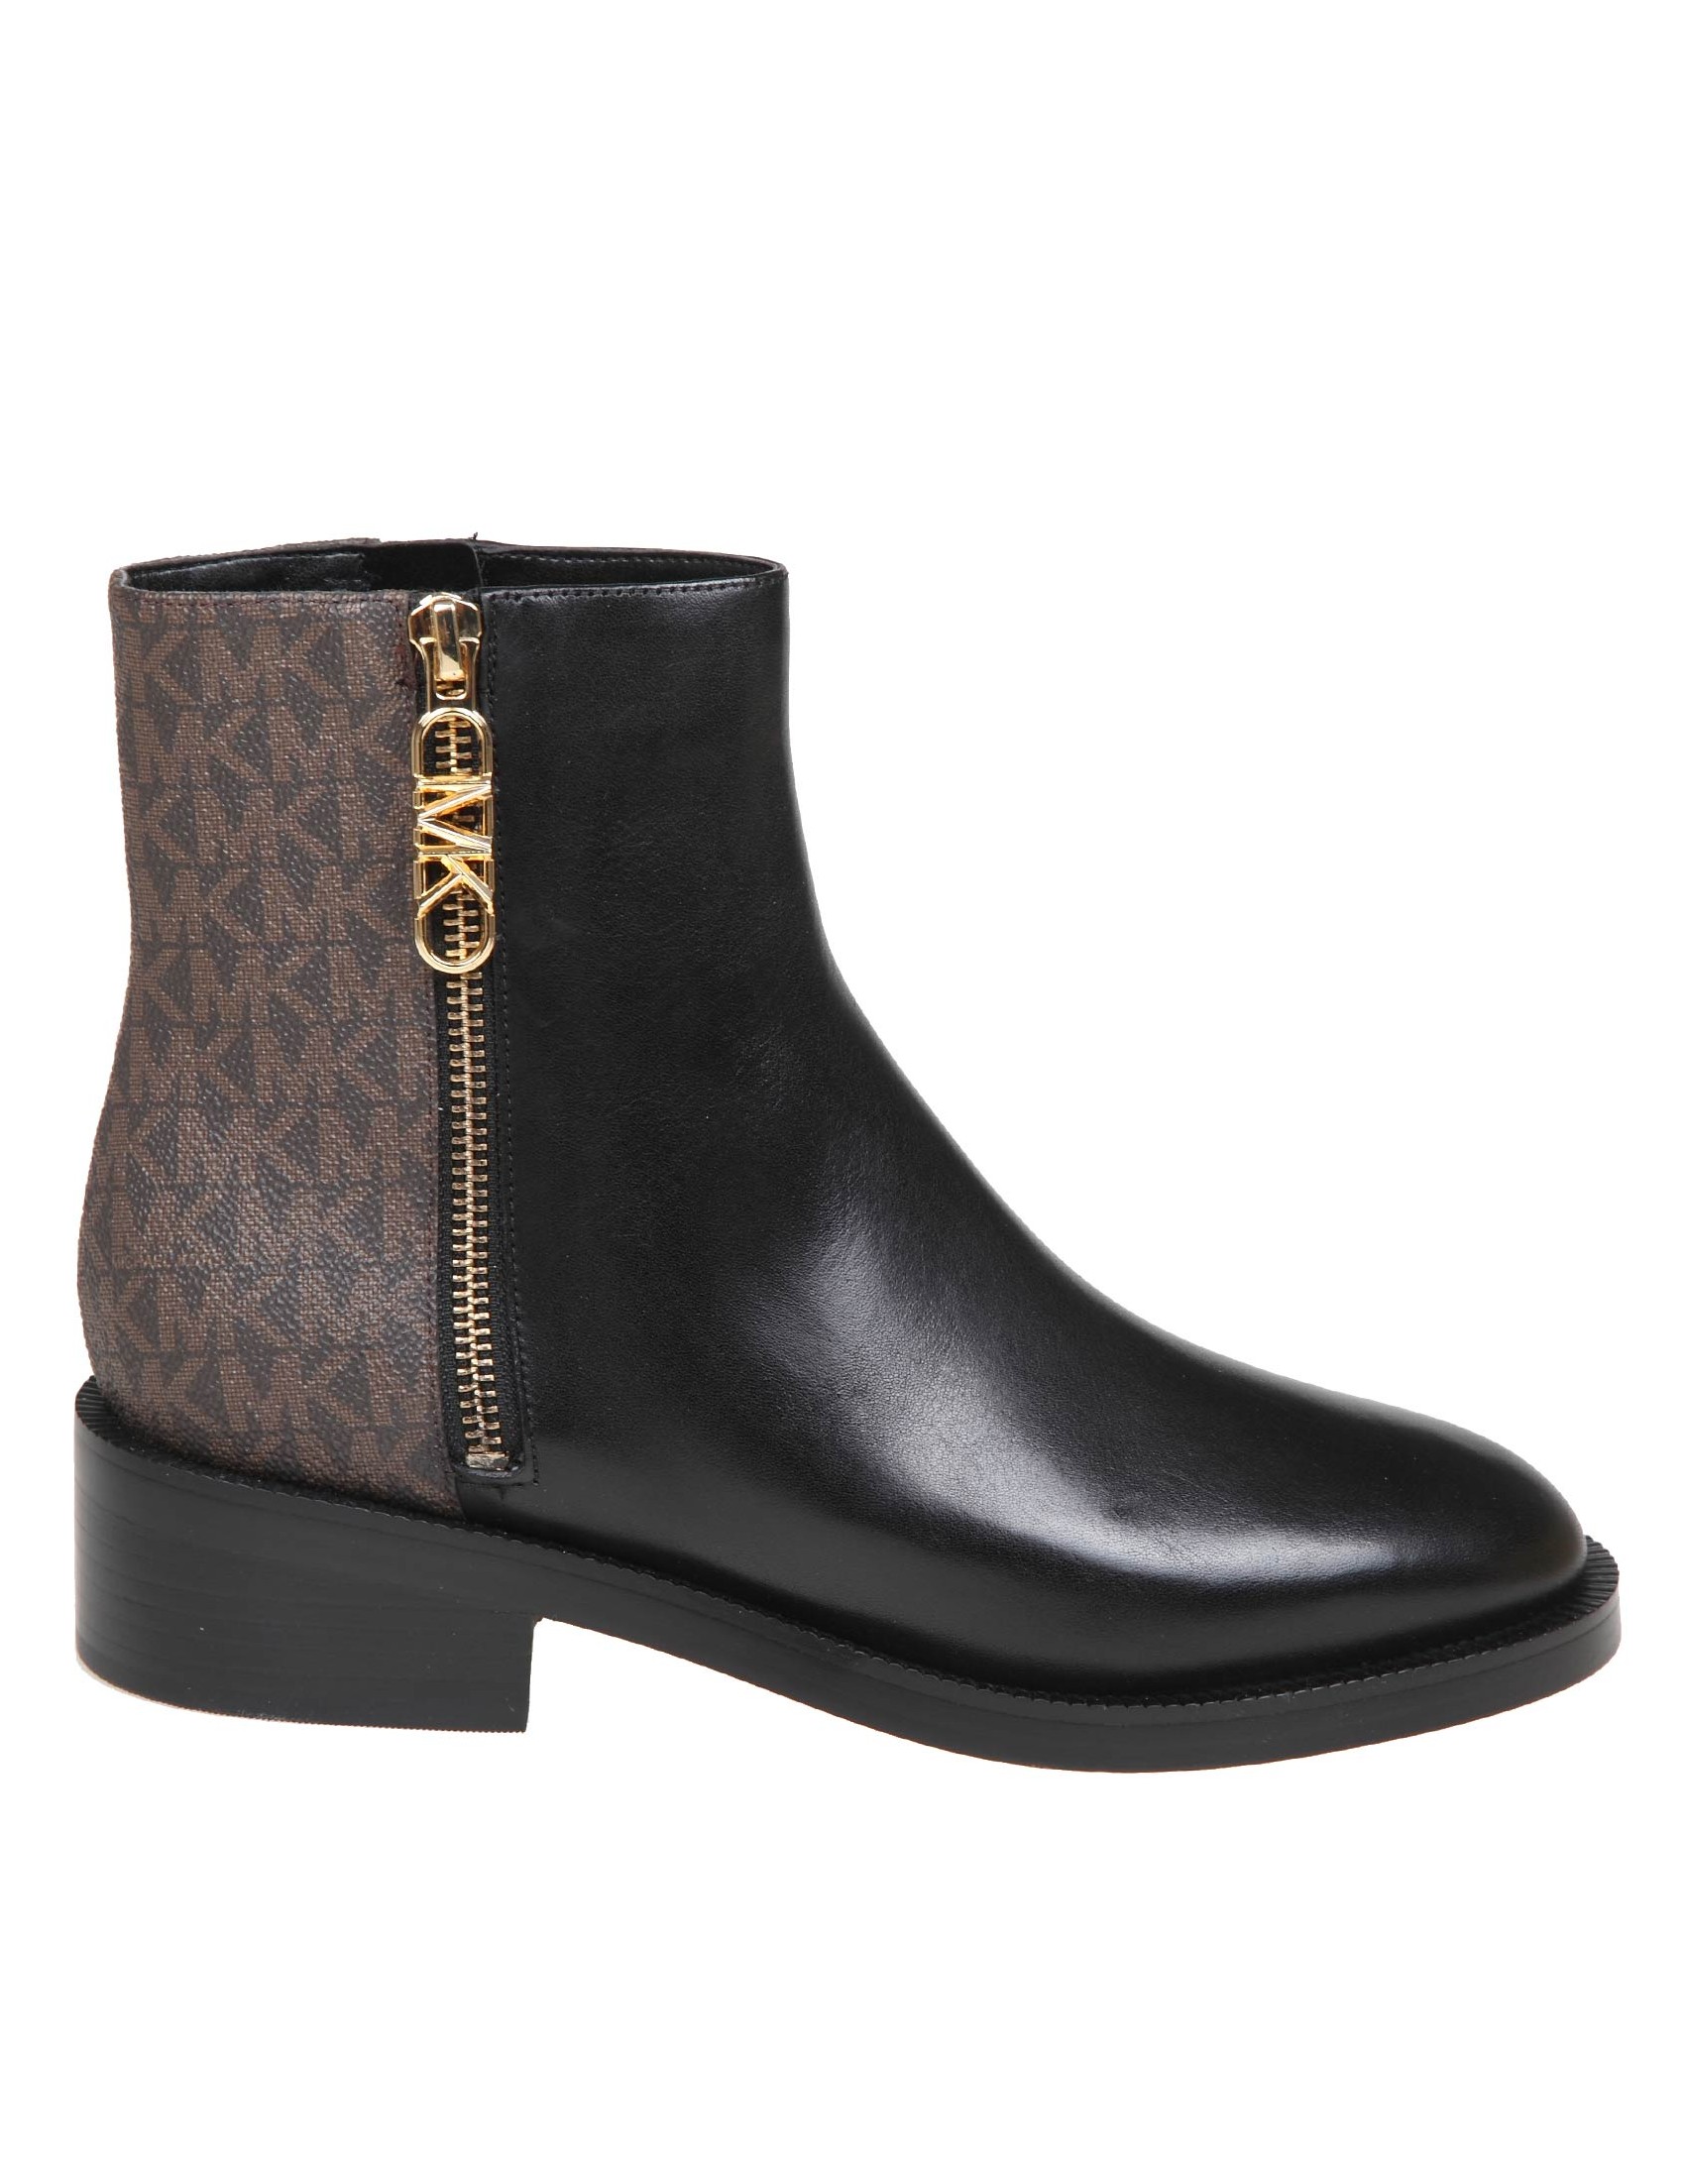 MICHAEL KORS REGAN ANKLE BOOTS IN BLACK LEATHER WITH MK LOGO